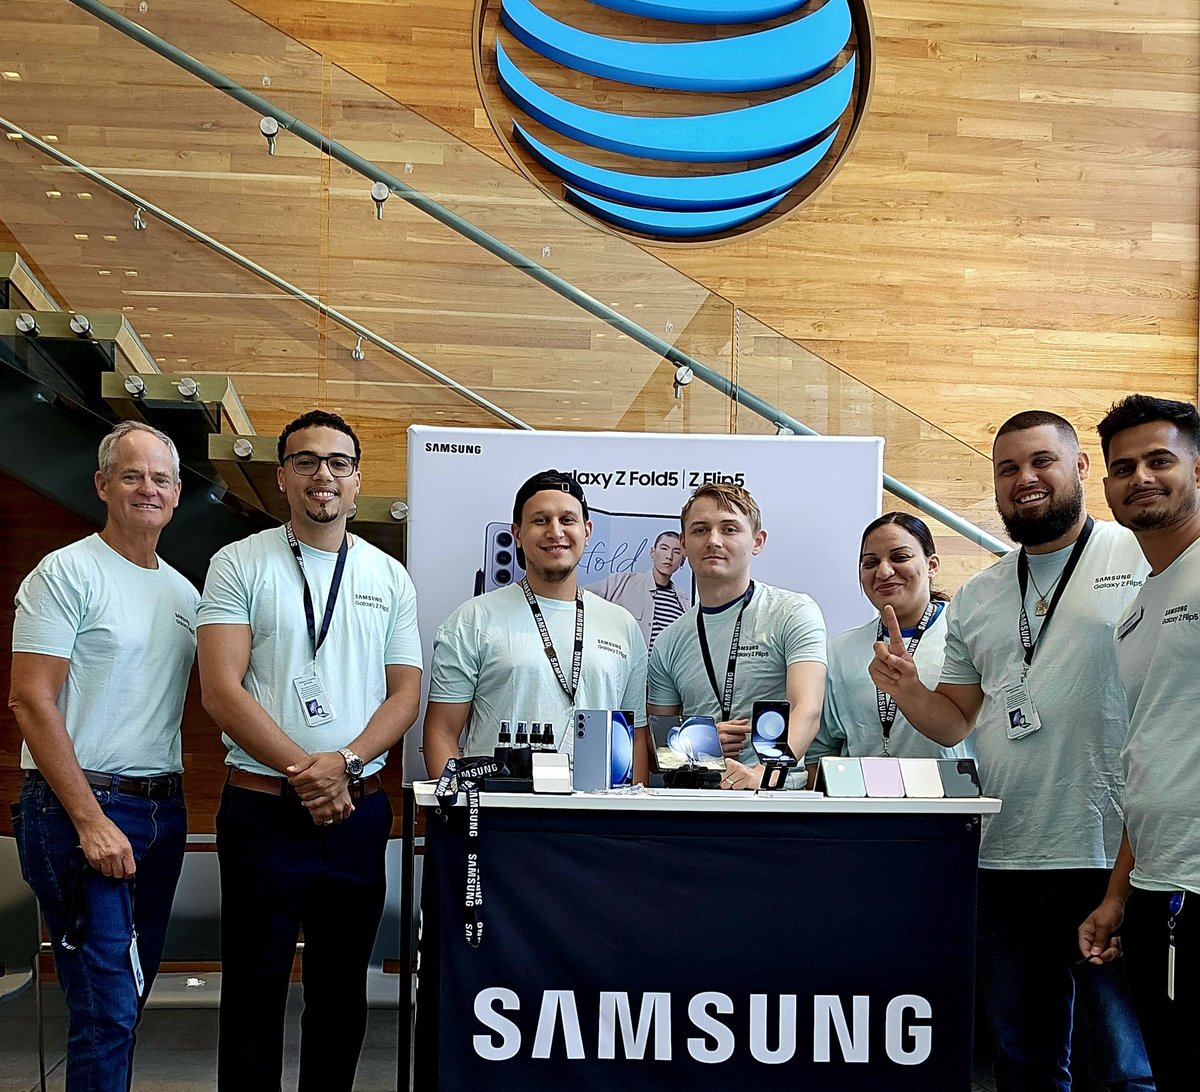 #GalaxyZFlip5 has now launched! What a great product now available in store! #GalaxyZFlip5 @SamsungMobile #GalaxyZFold5 Thanks for the tshirt @KellyIngle @TheRealOurNE @emilywiper @eddieself16